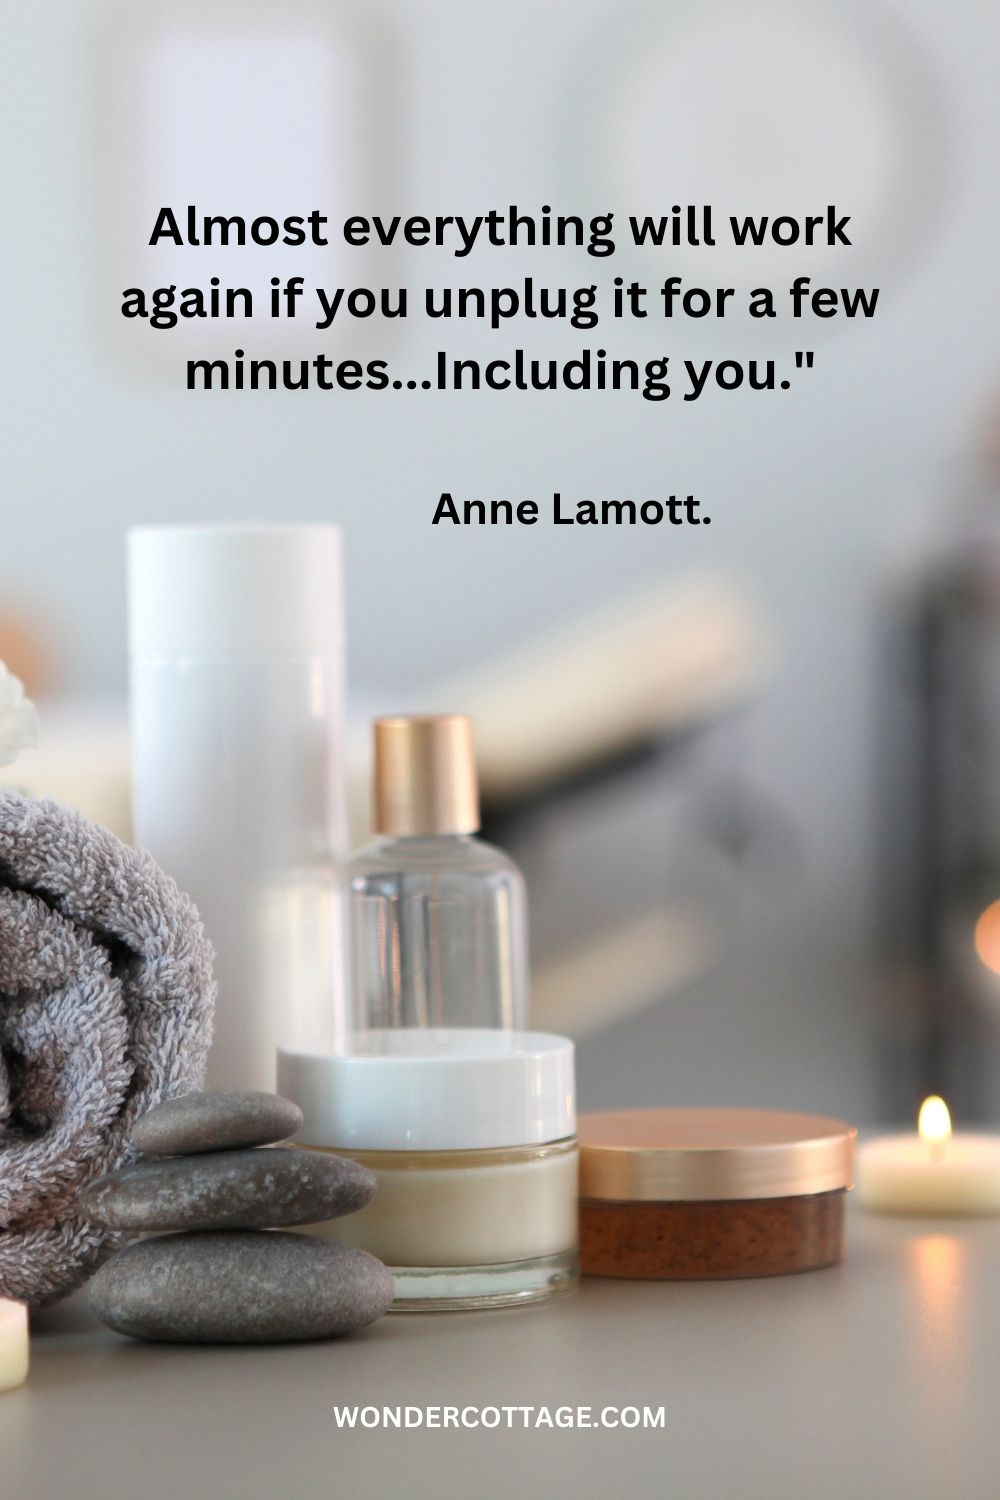 Almost everything will work again if you unplug it for a few minutes...Including you." Anne Lamott.